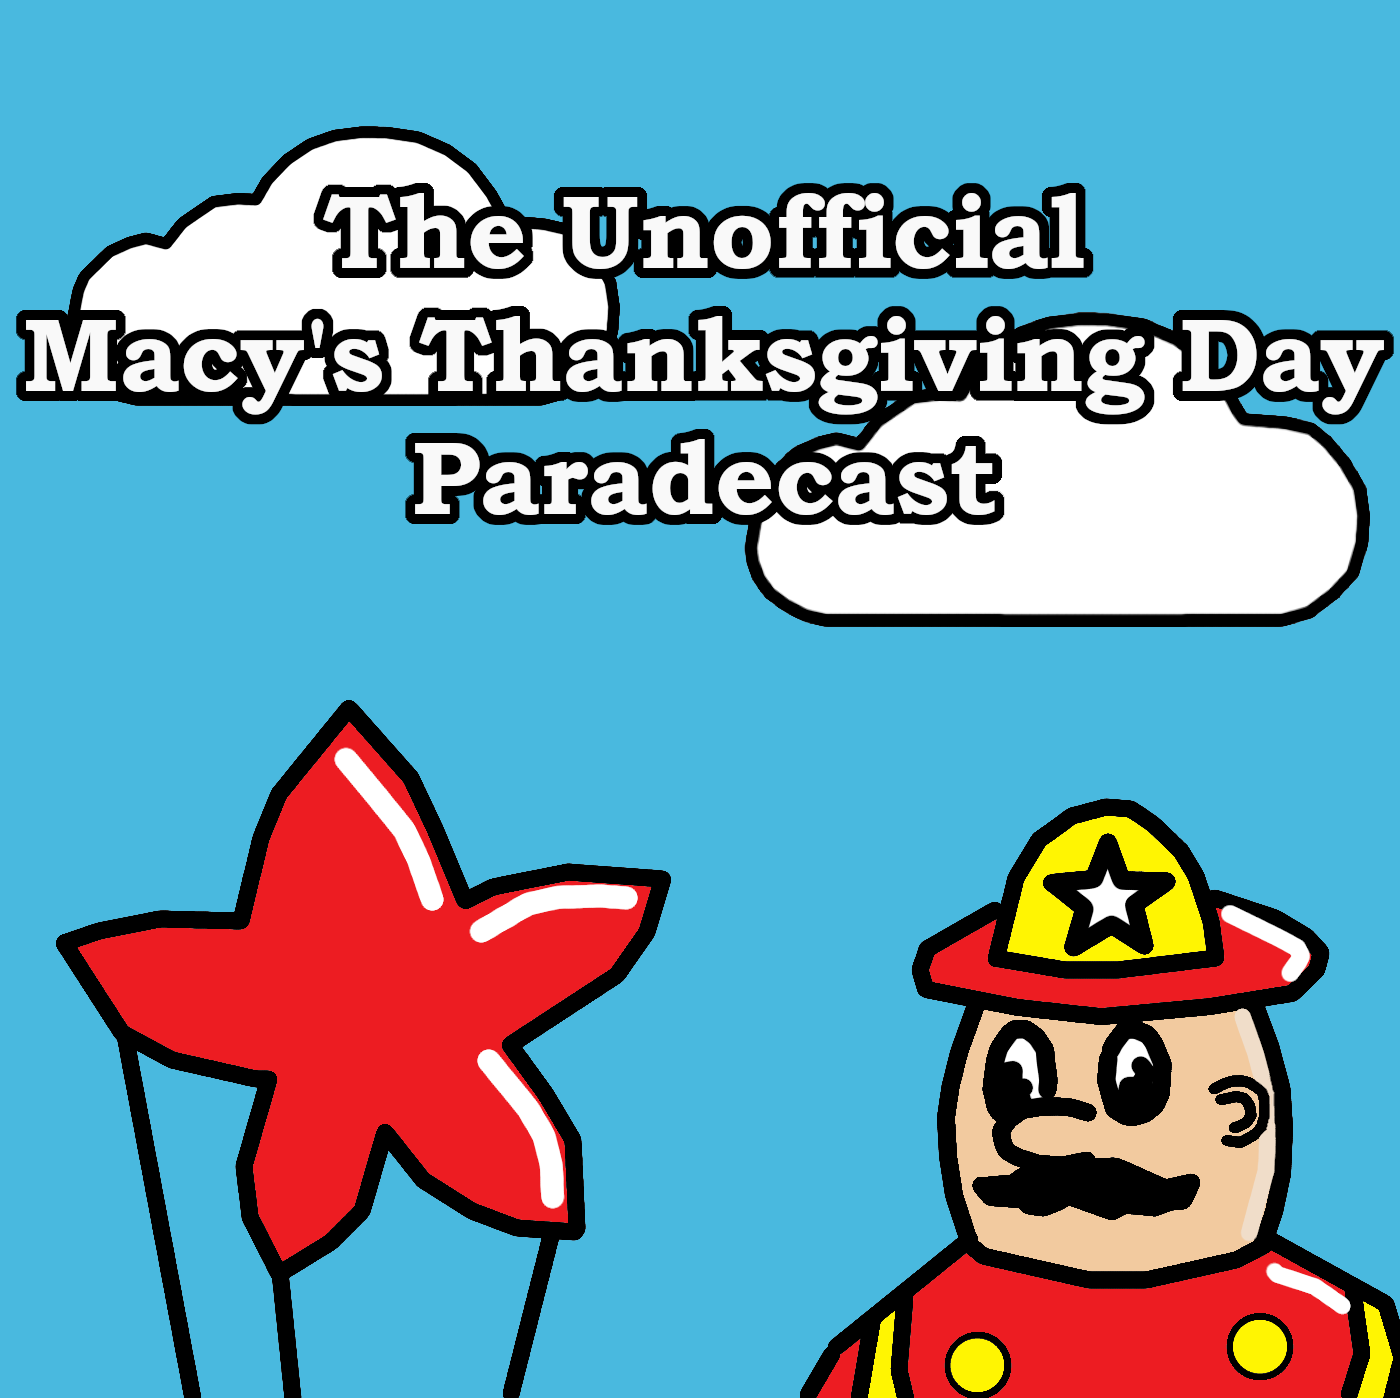 The Unofficial Macy's Thanksgiving Day Paradecast